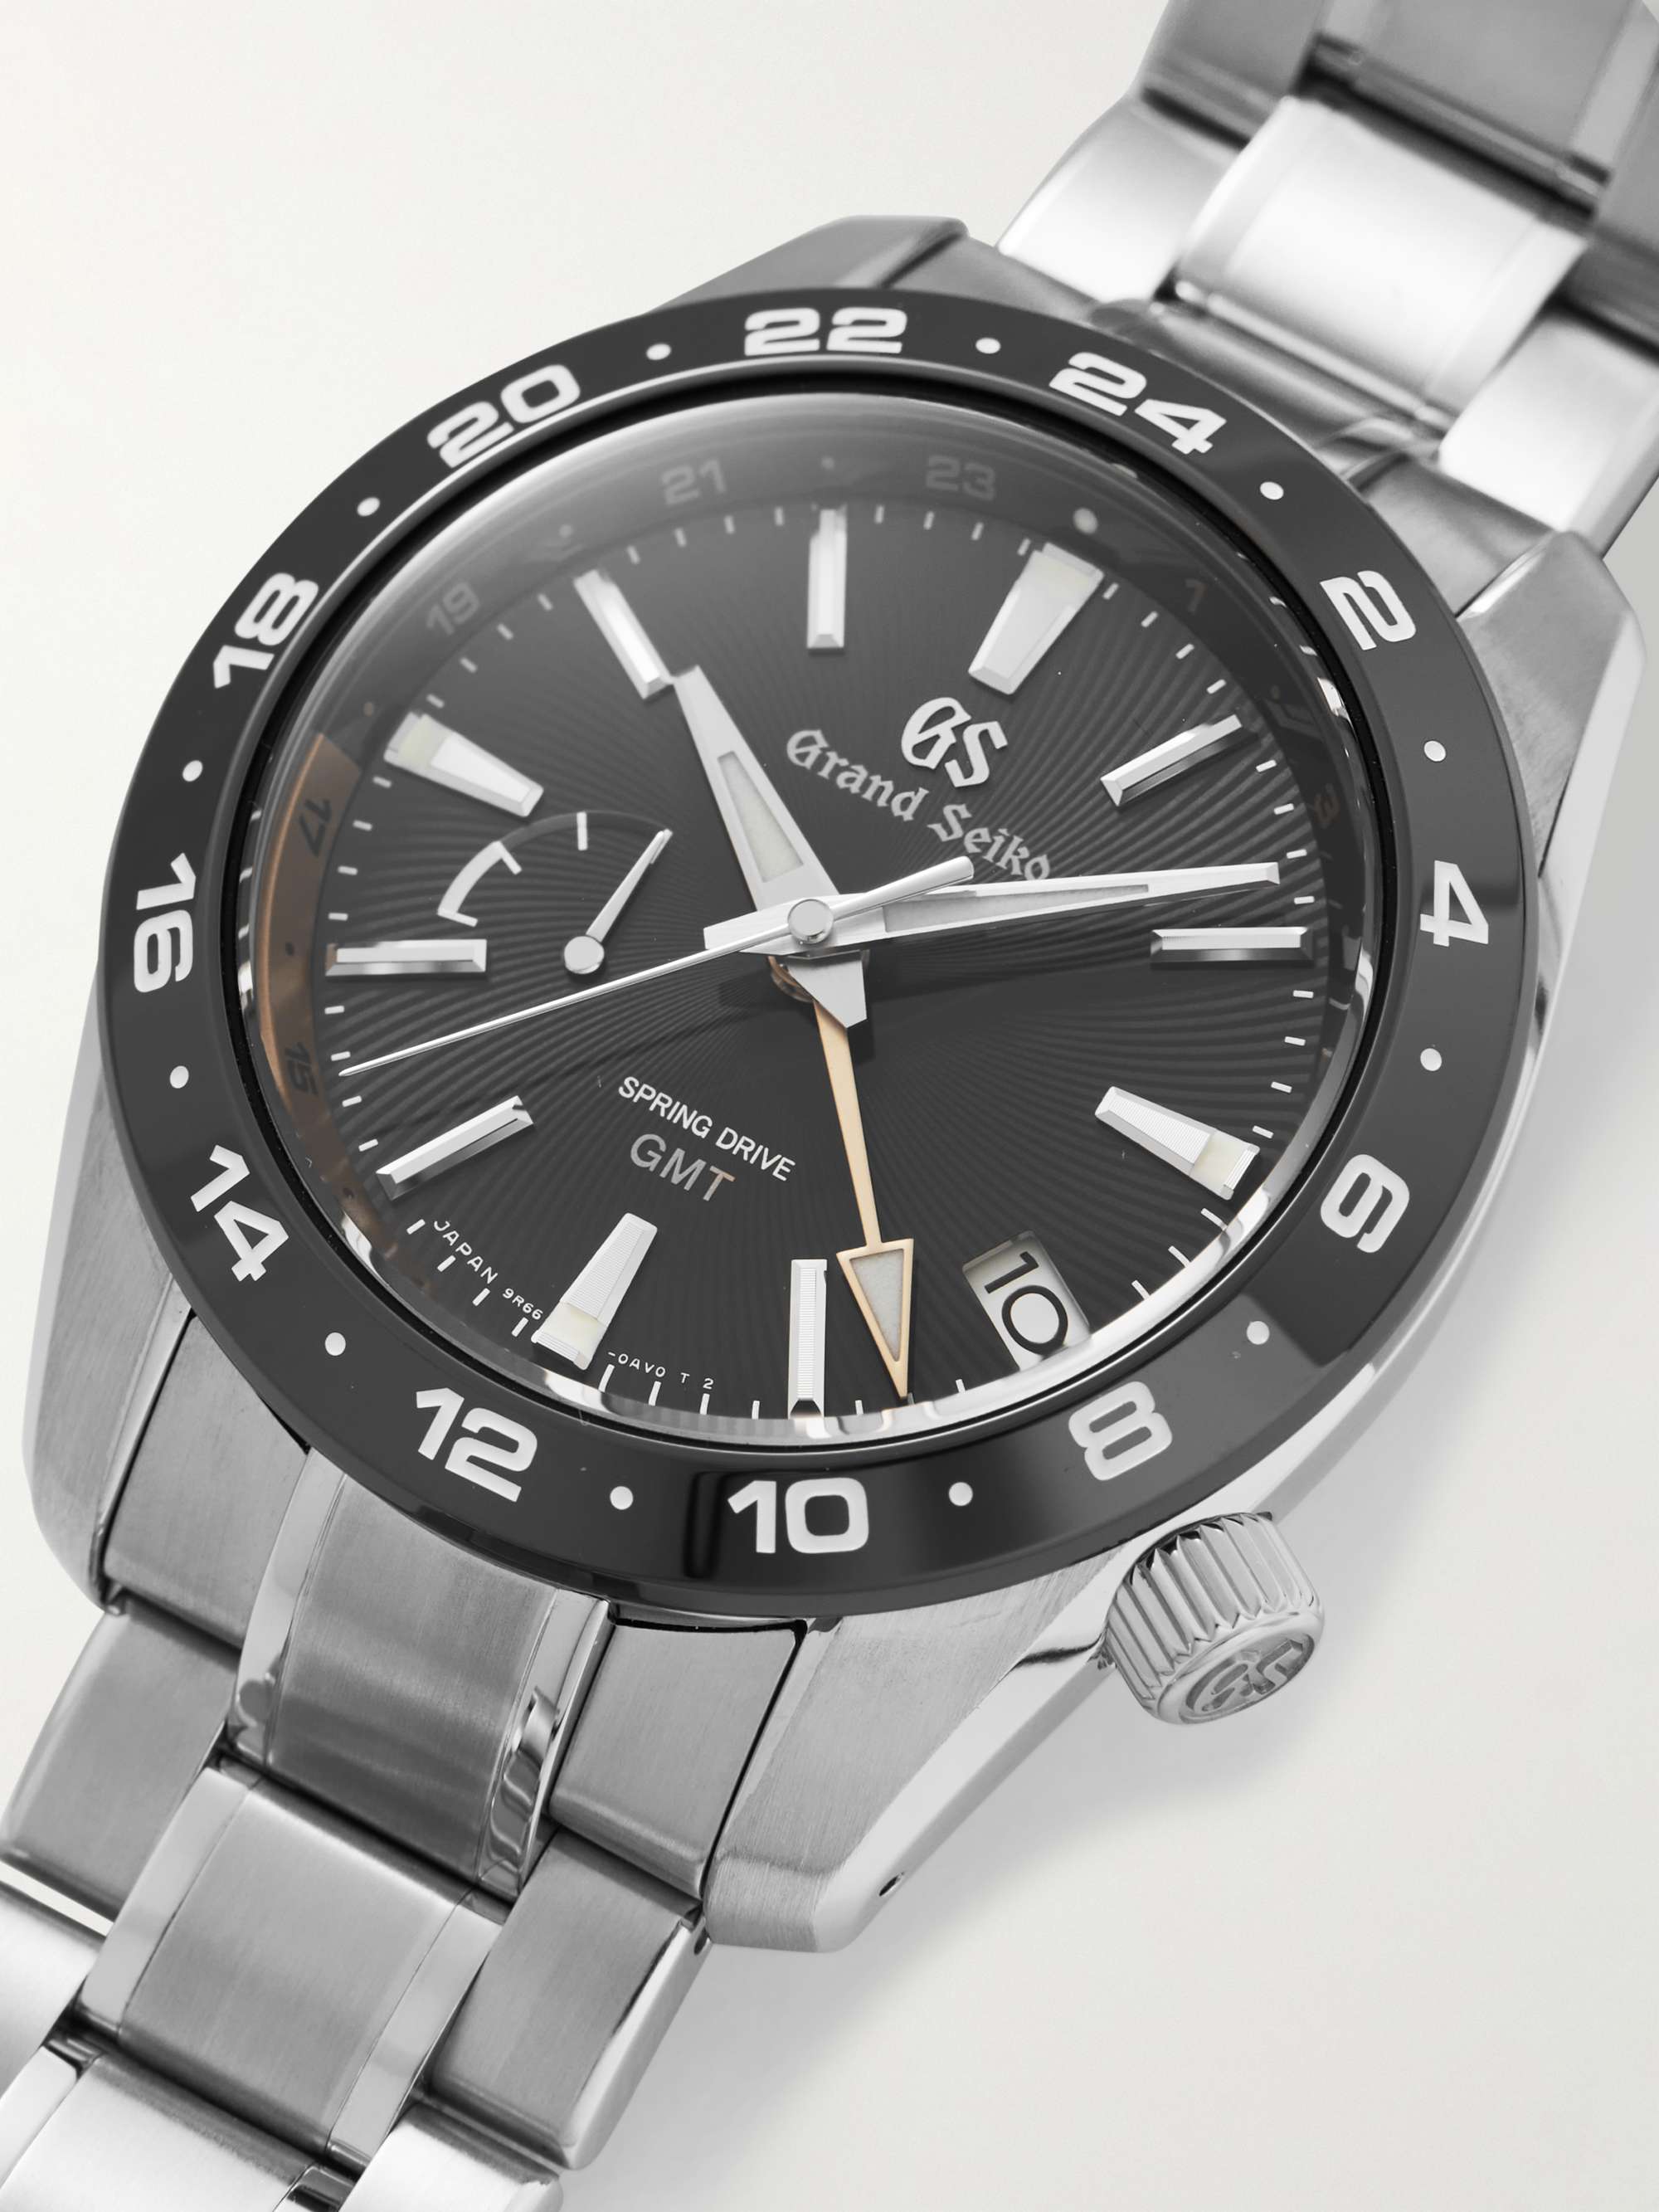 Black Pre-Owned 2021 Spring Drive GMT Automatic 40.5mm Stainless Steel  Watch, Ref. No. SBGE263 | GRAND SEIKO | MR PORTER